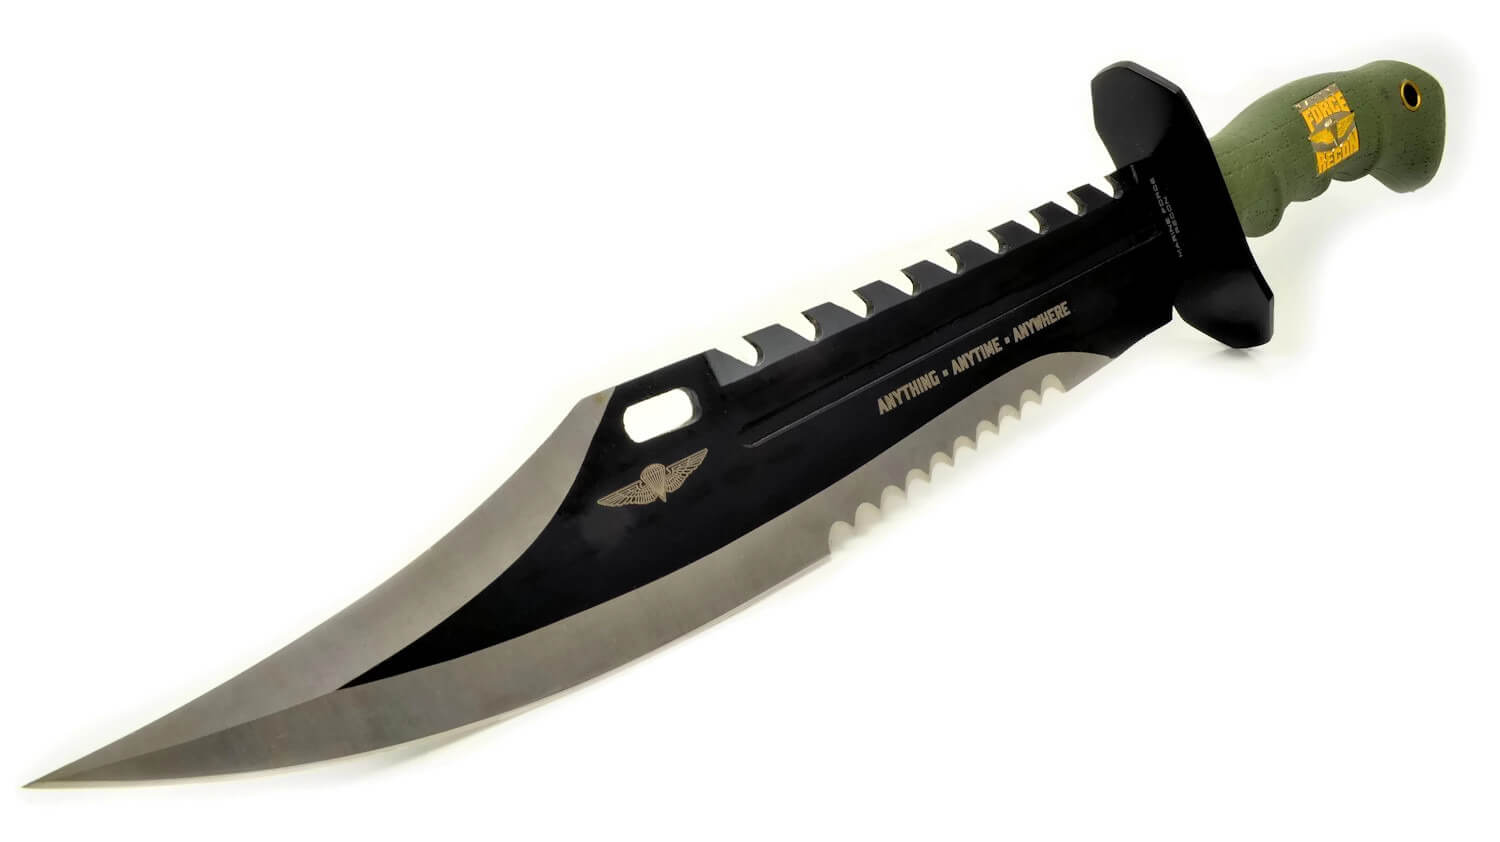 Central waiting room KN-BK-UC2863_Marine_Recon_Bowie_Survival_Knife_01